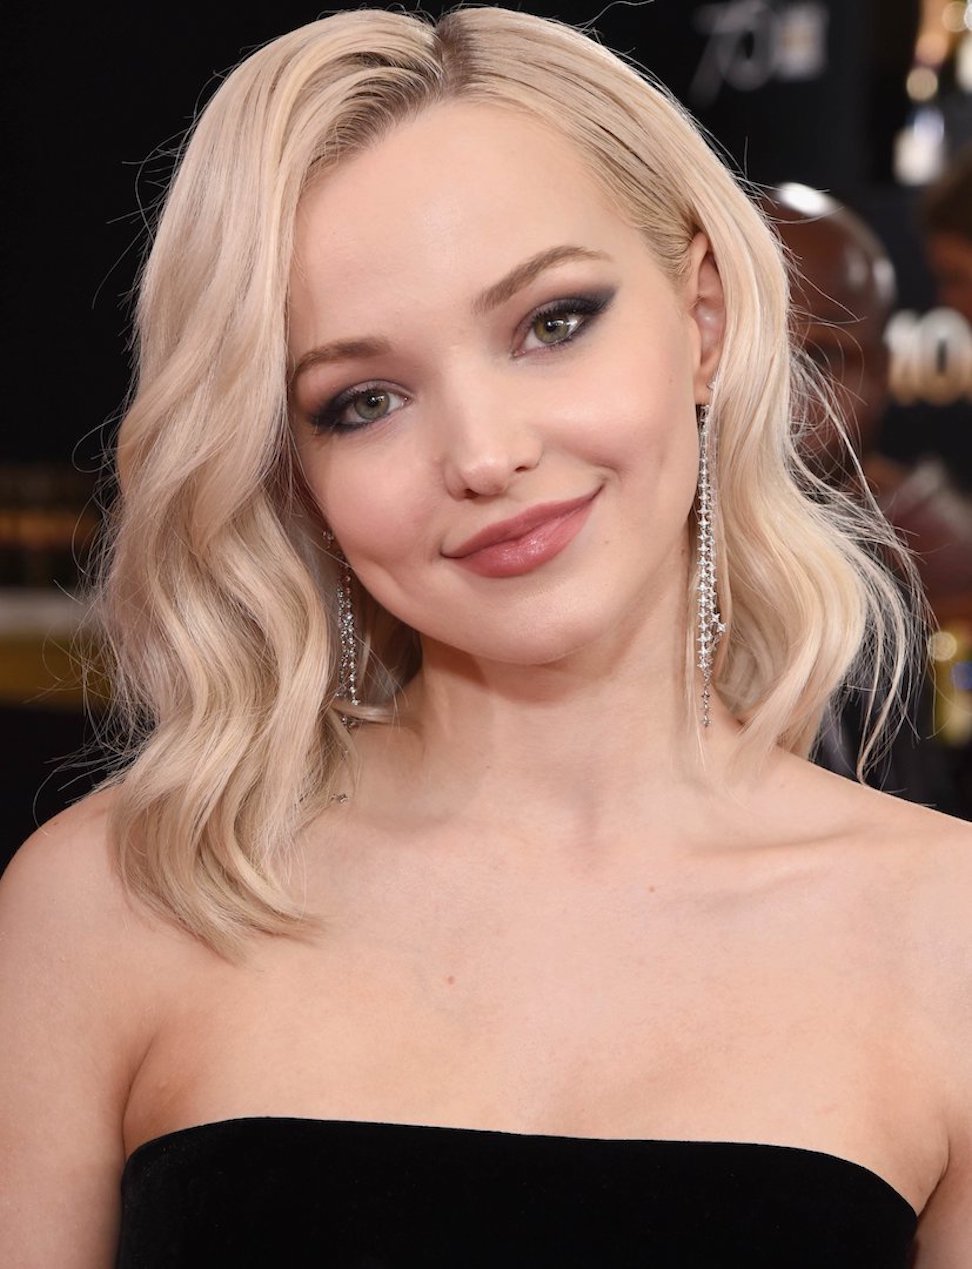 How tall is Dove Cameron?